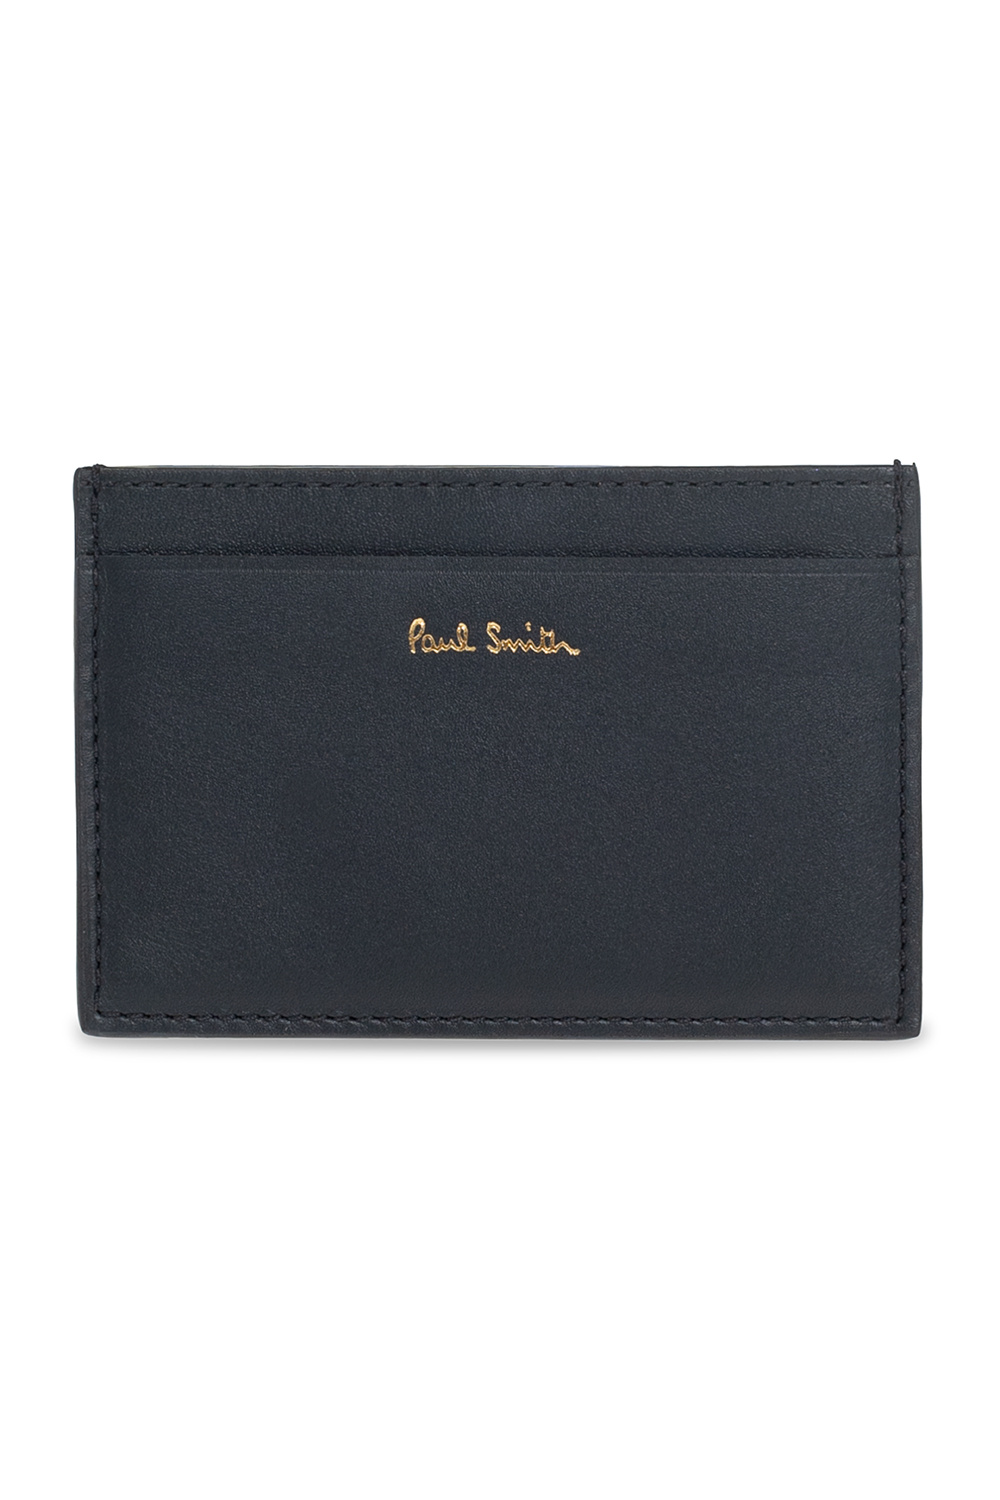 Paul Smith Socks three-pack and card case set